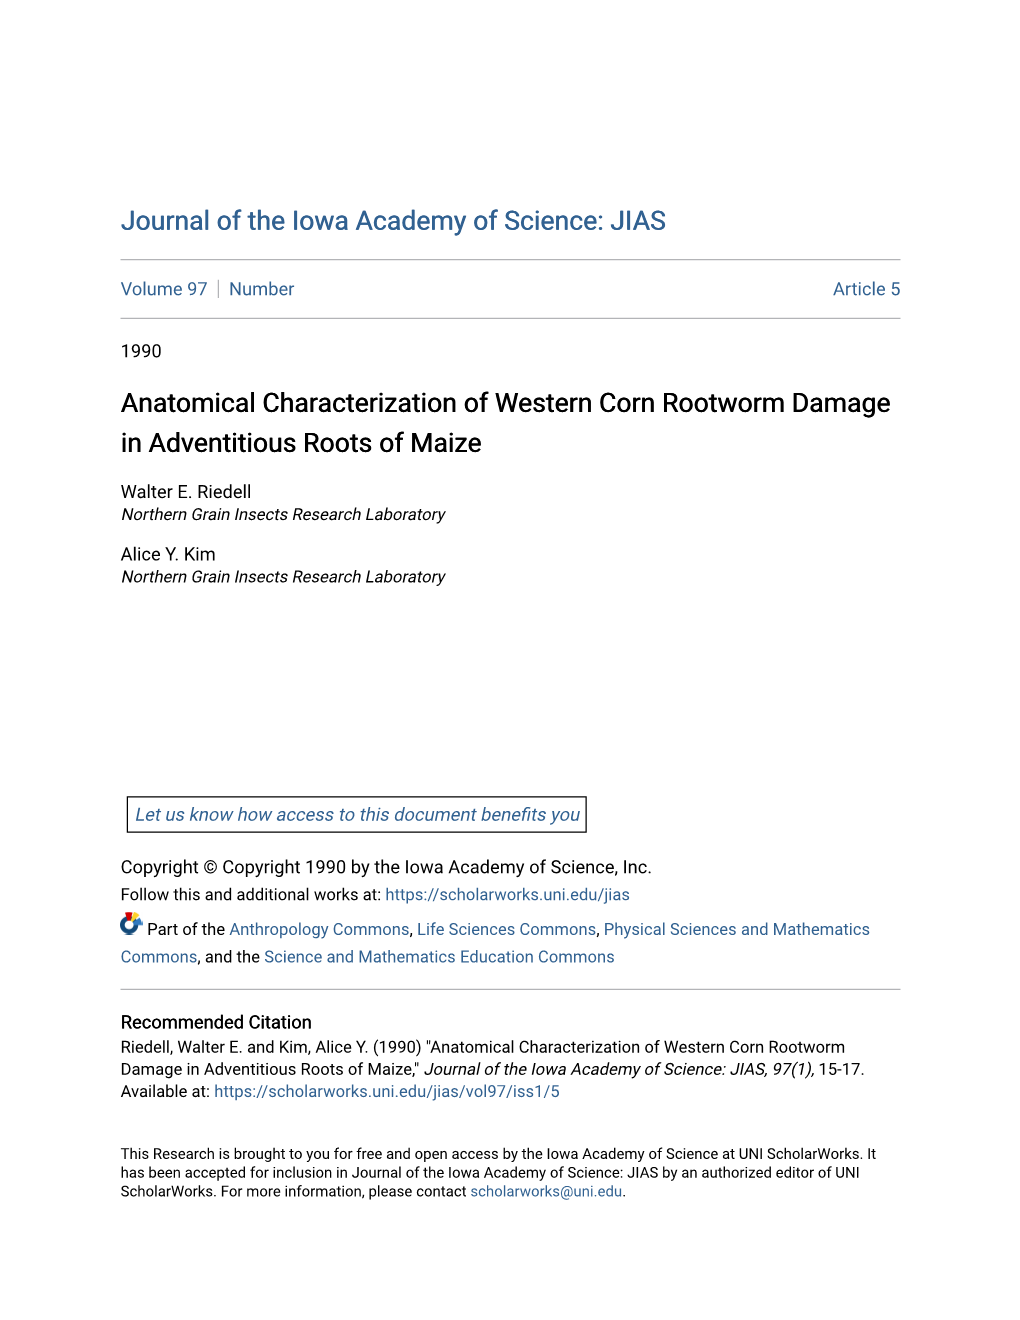 Anatomical Characterization of Western Corn Rootworm Damage in Adventitious Roots of Maize